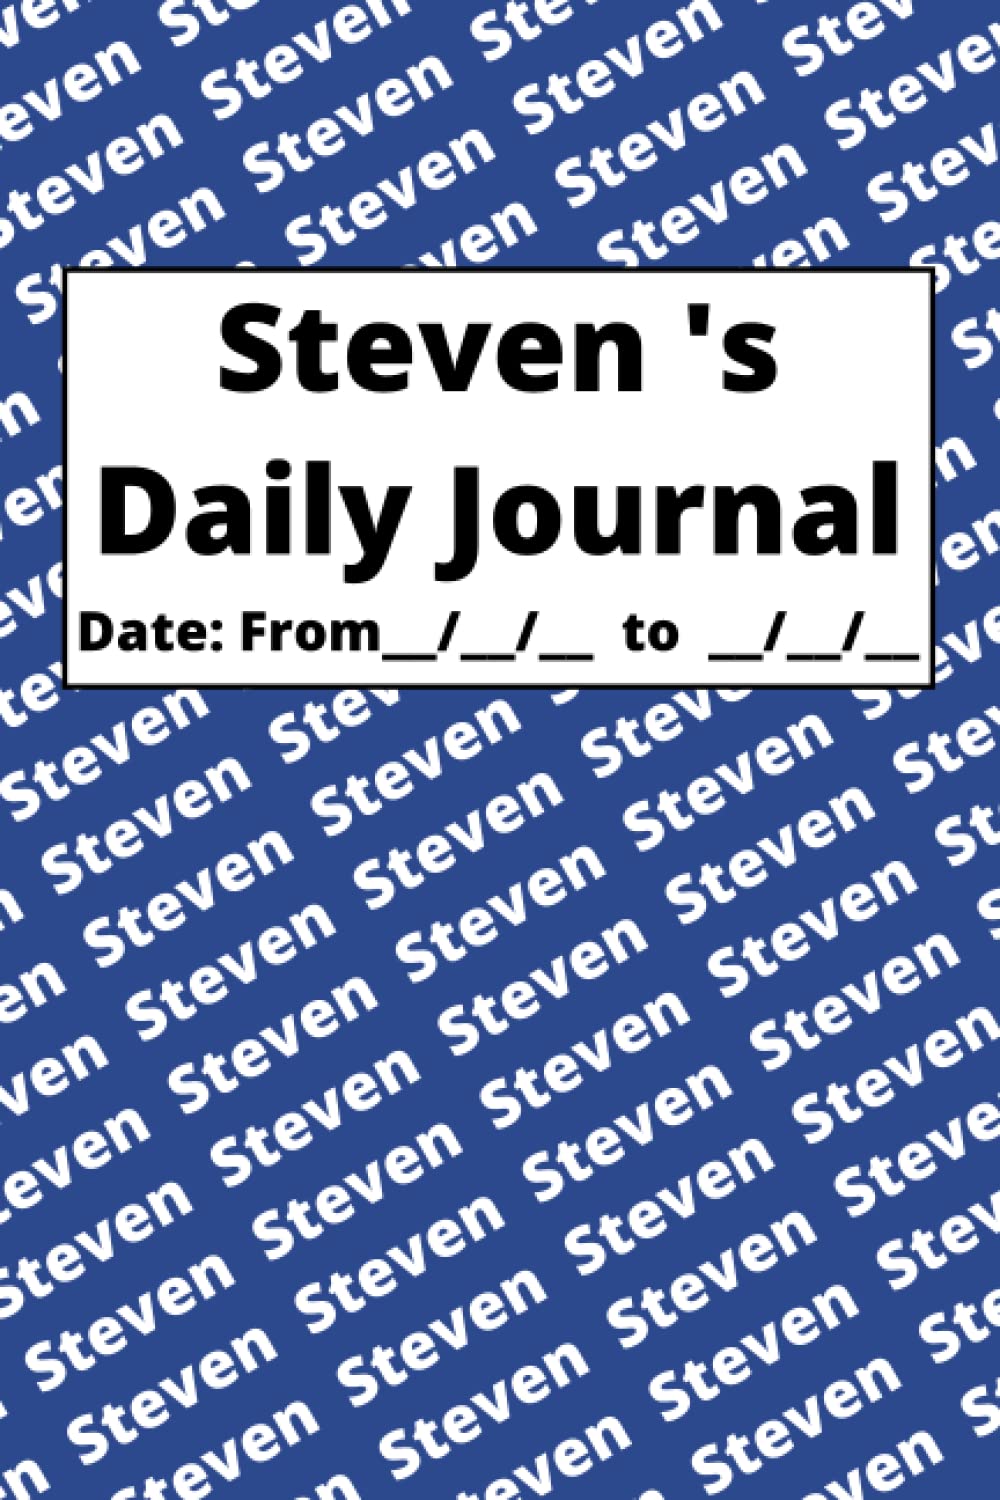 Personalized Daily Journal – Steven: Blue cover